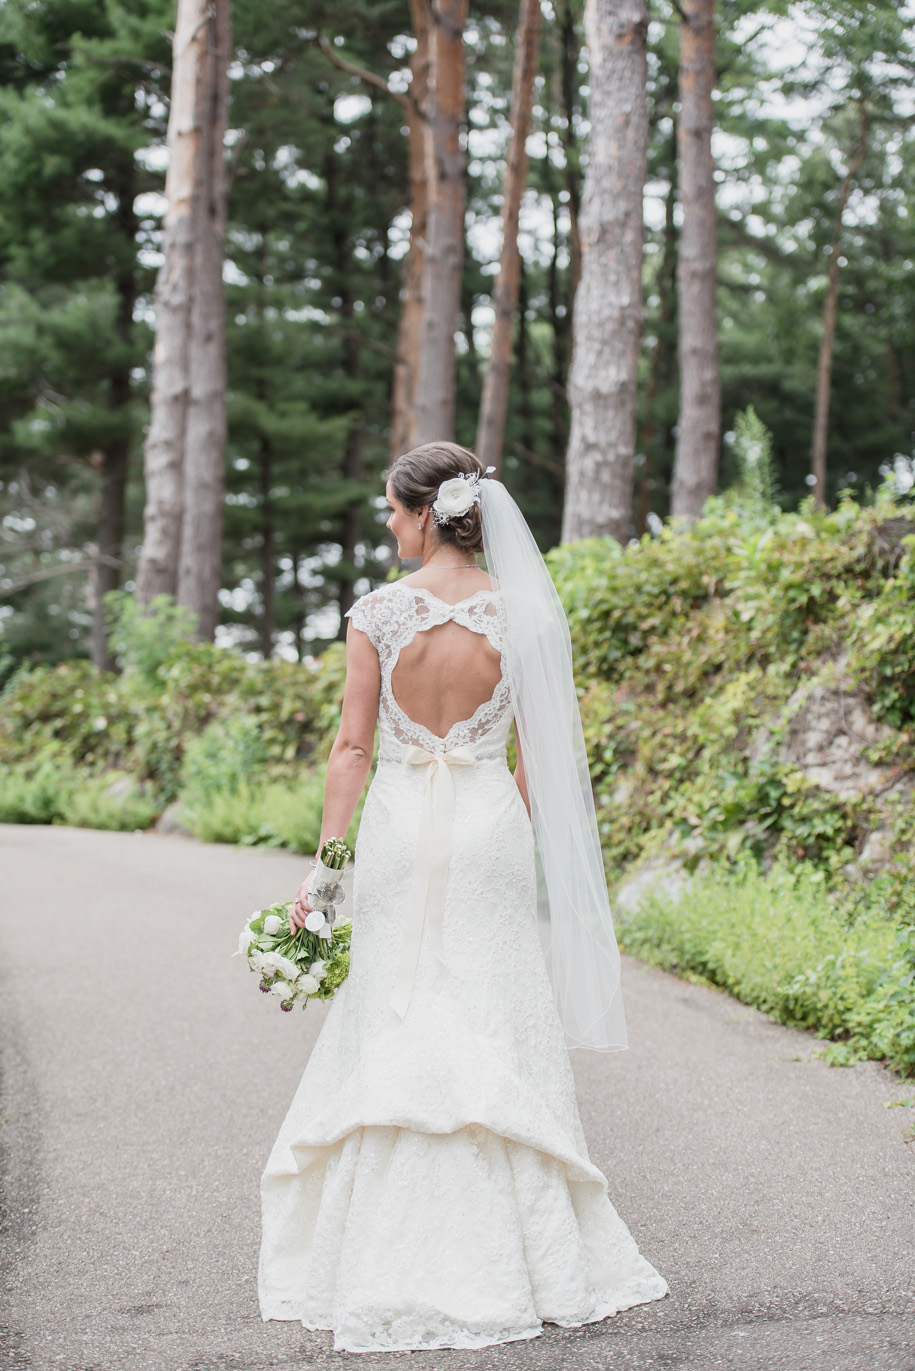 I love the way this lace wedding dress with open back bustles perfectly l Black tie country club wedding l Rustic elegance l Rustic bouquet l Up do l Veil